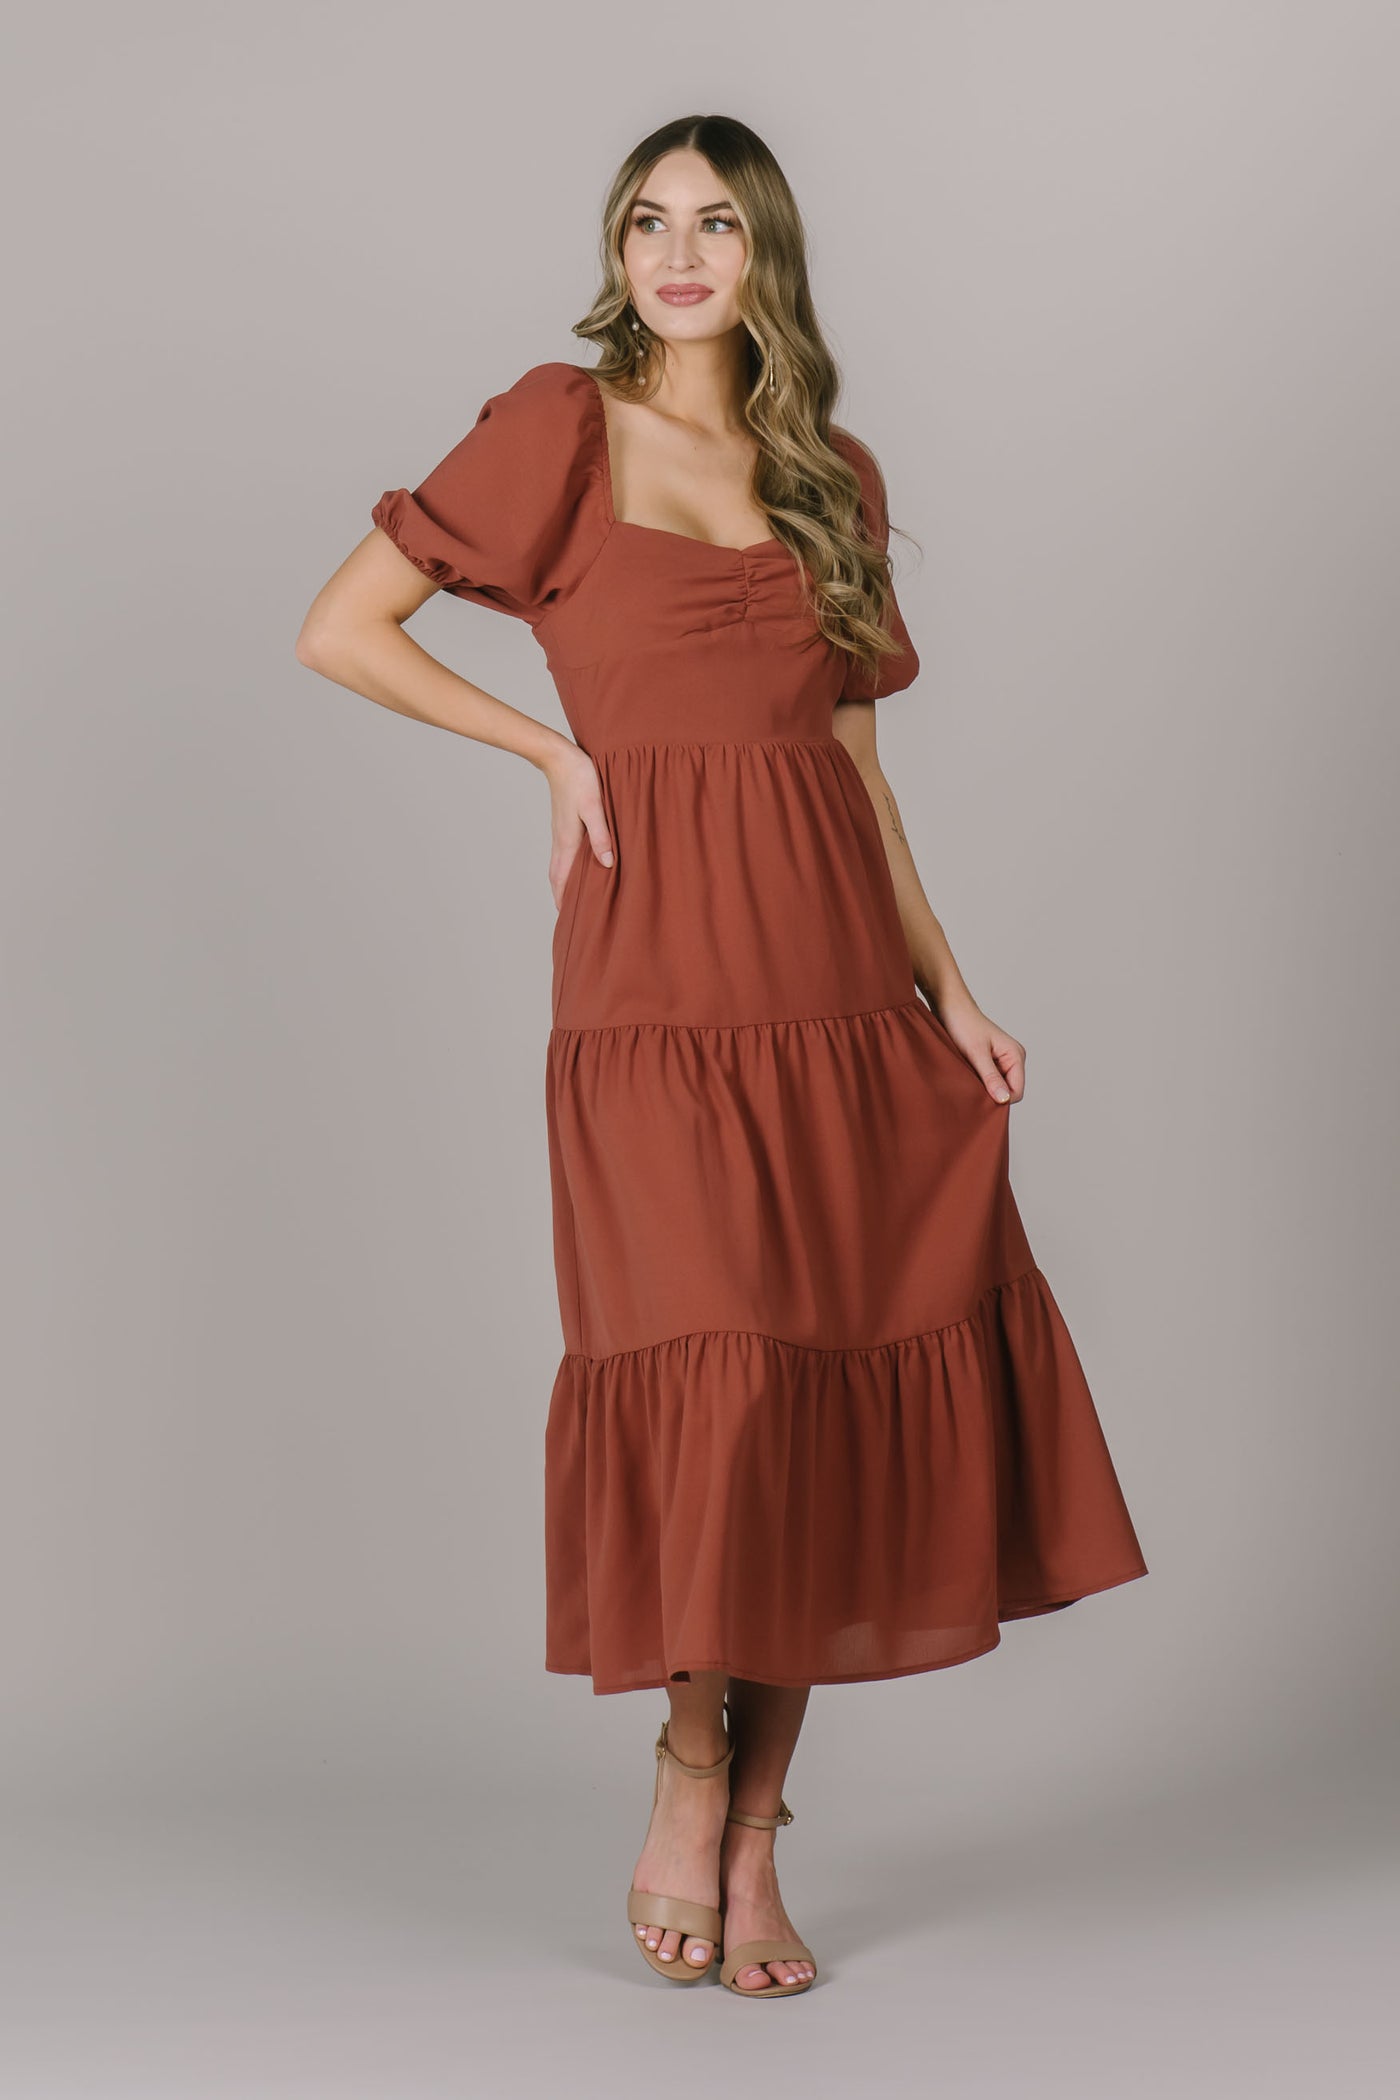 A modest dress in a beautiful rust color with a square neckline, puff sleeves, and a rouched bustline.